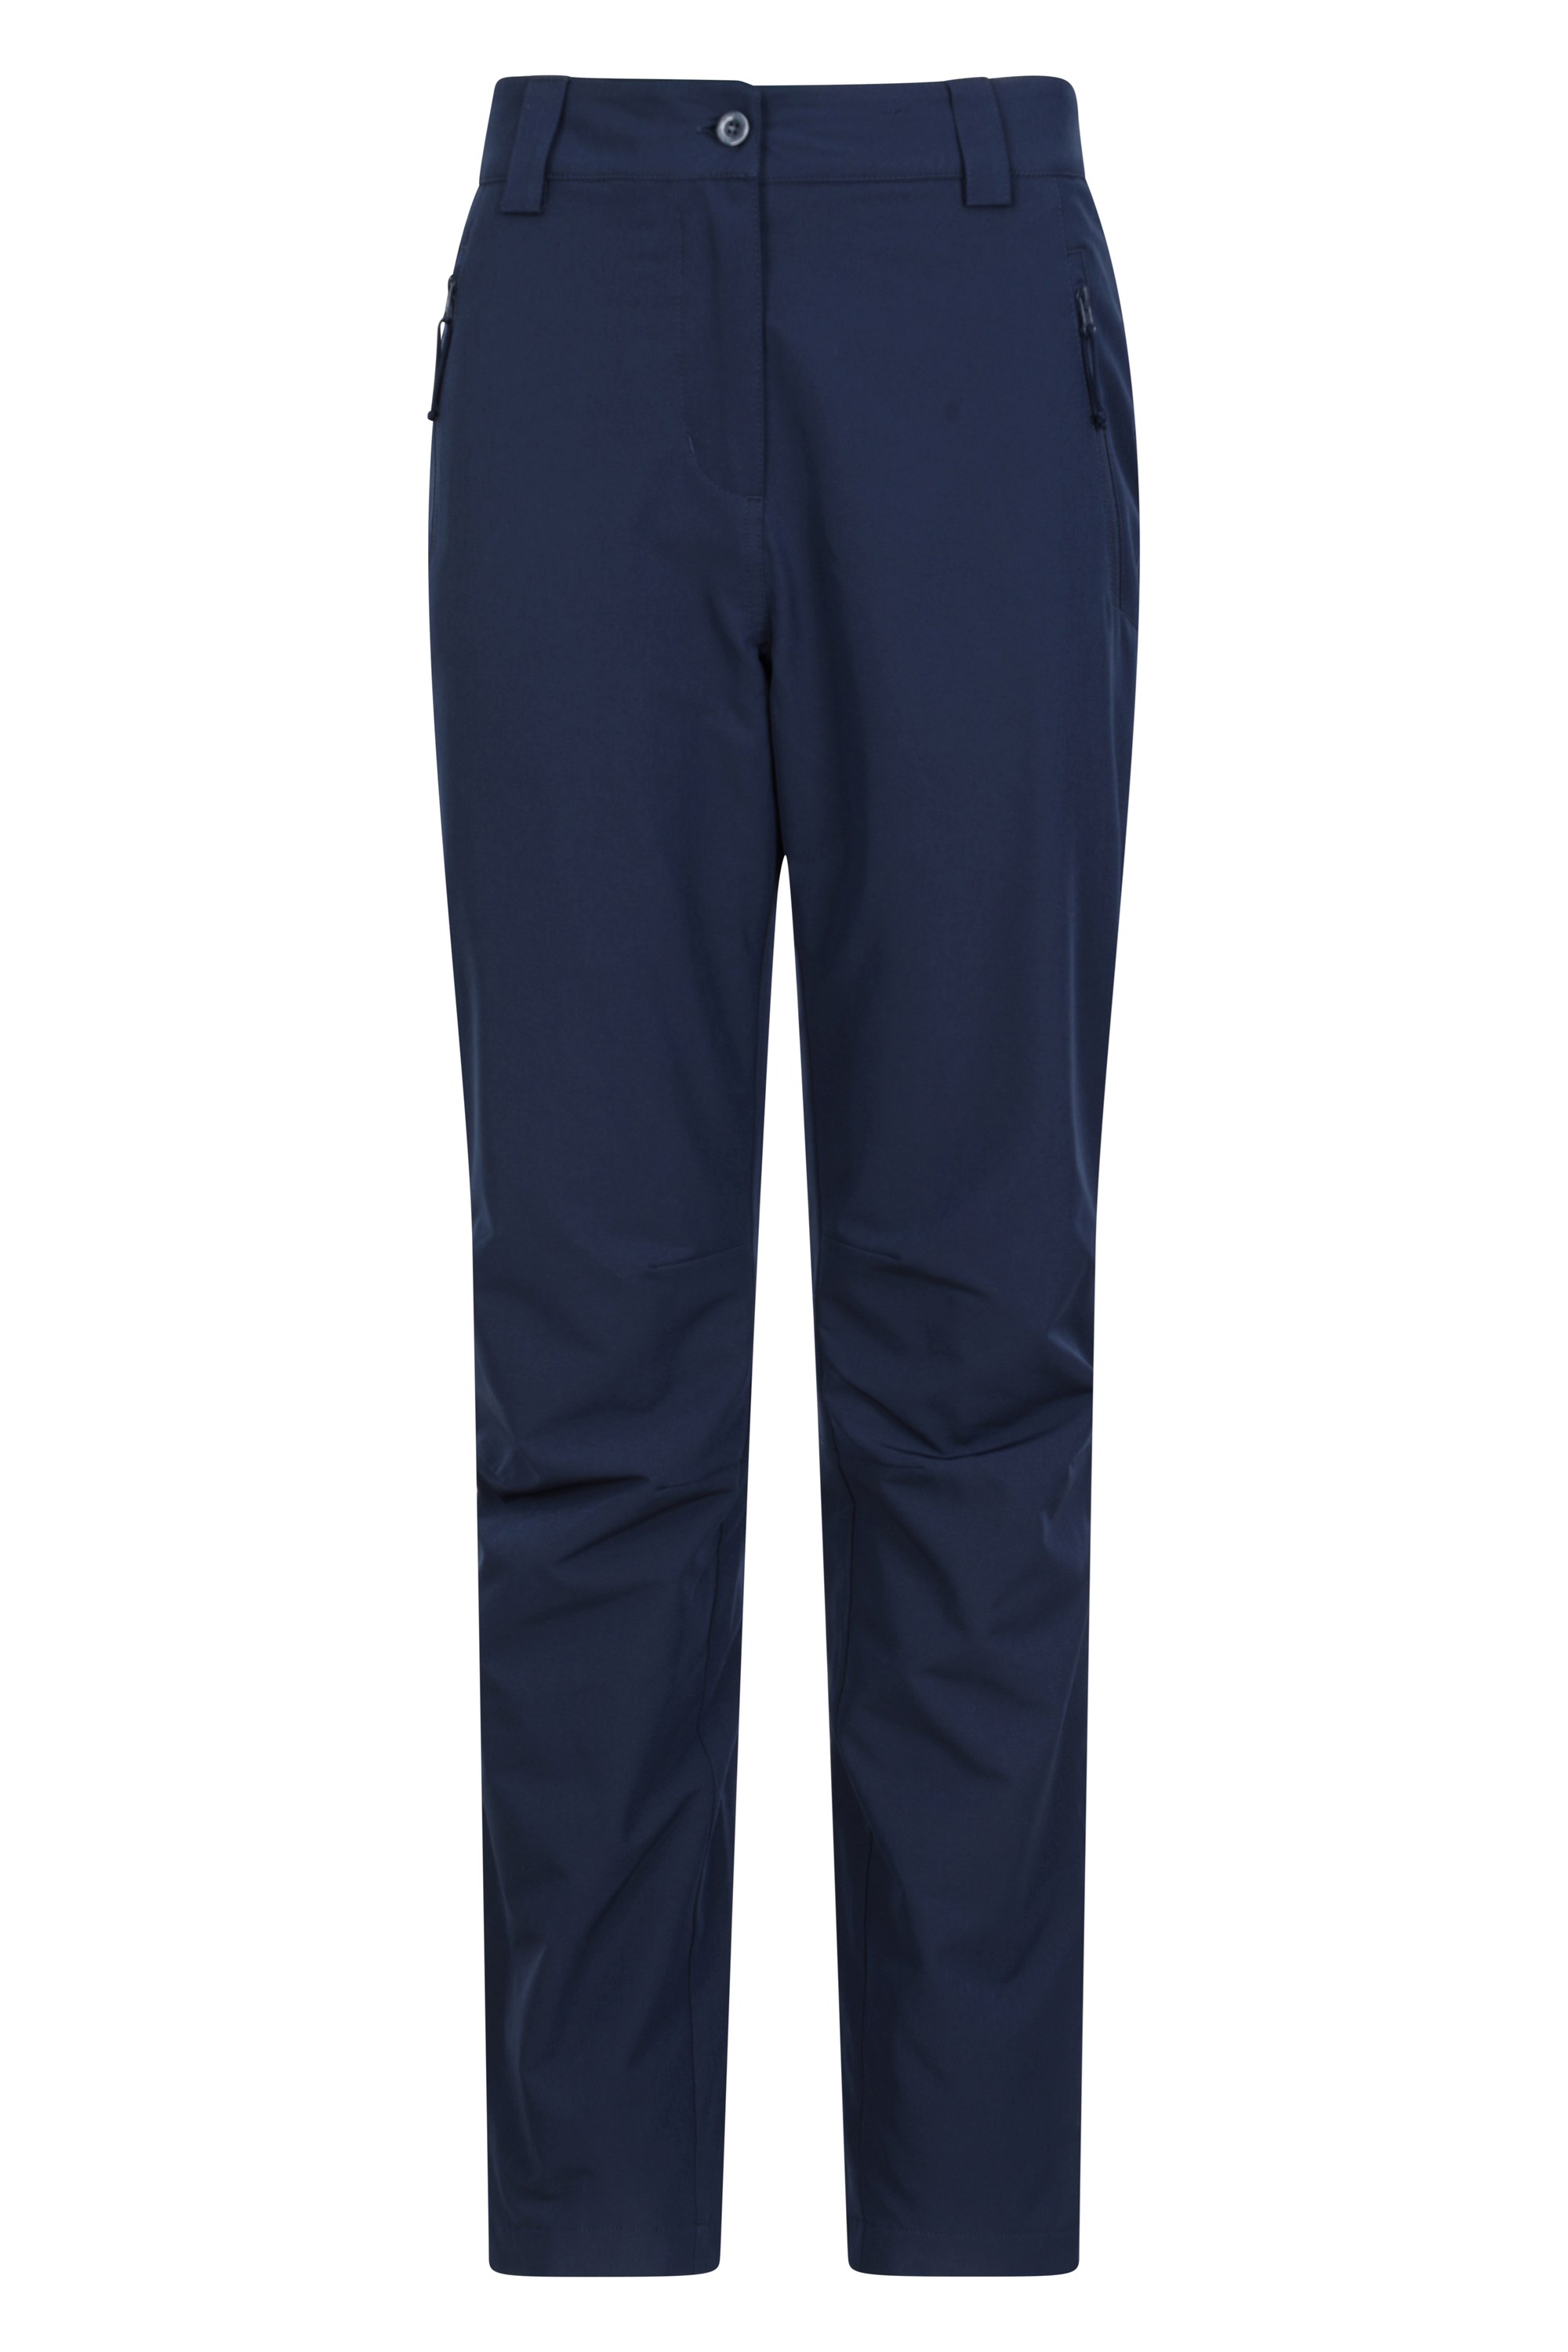 Arctic II Womens Thermal Fleece Lined Trousers Short Length Navy